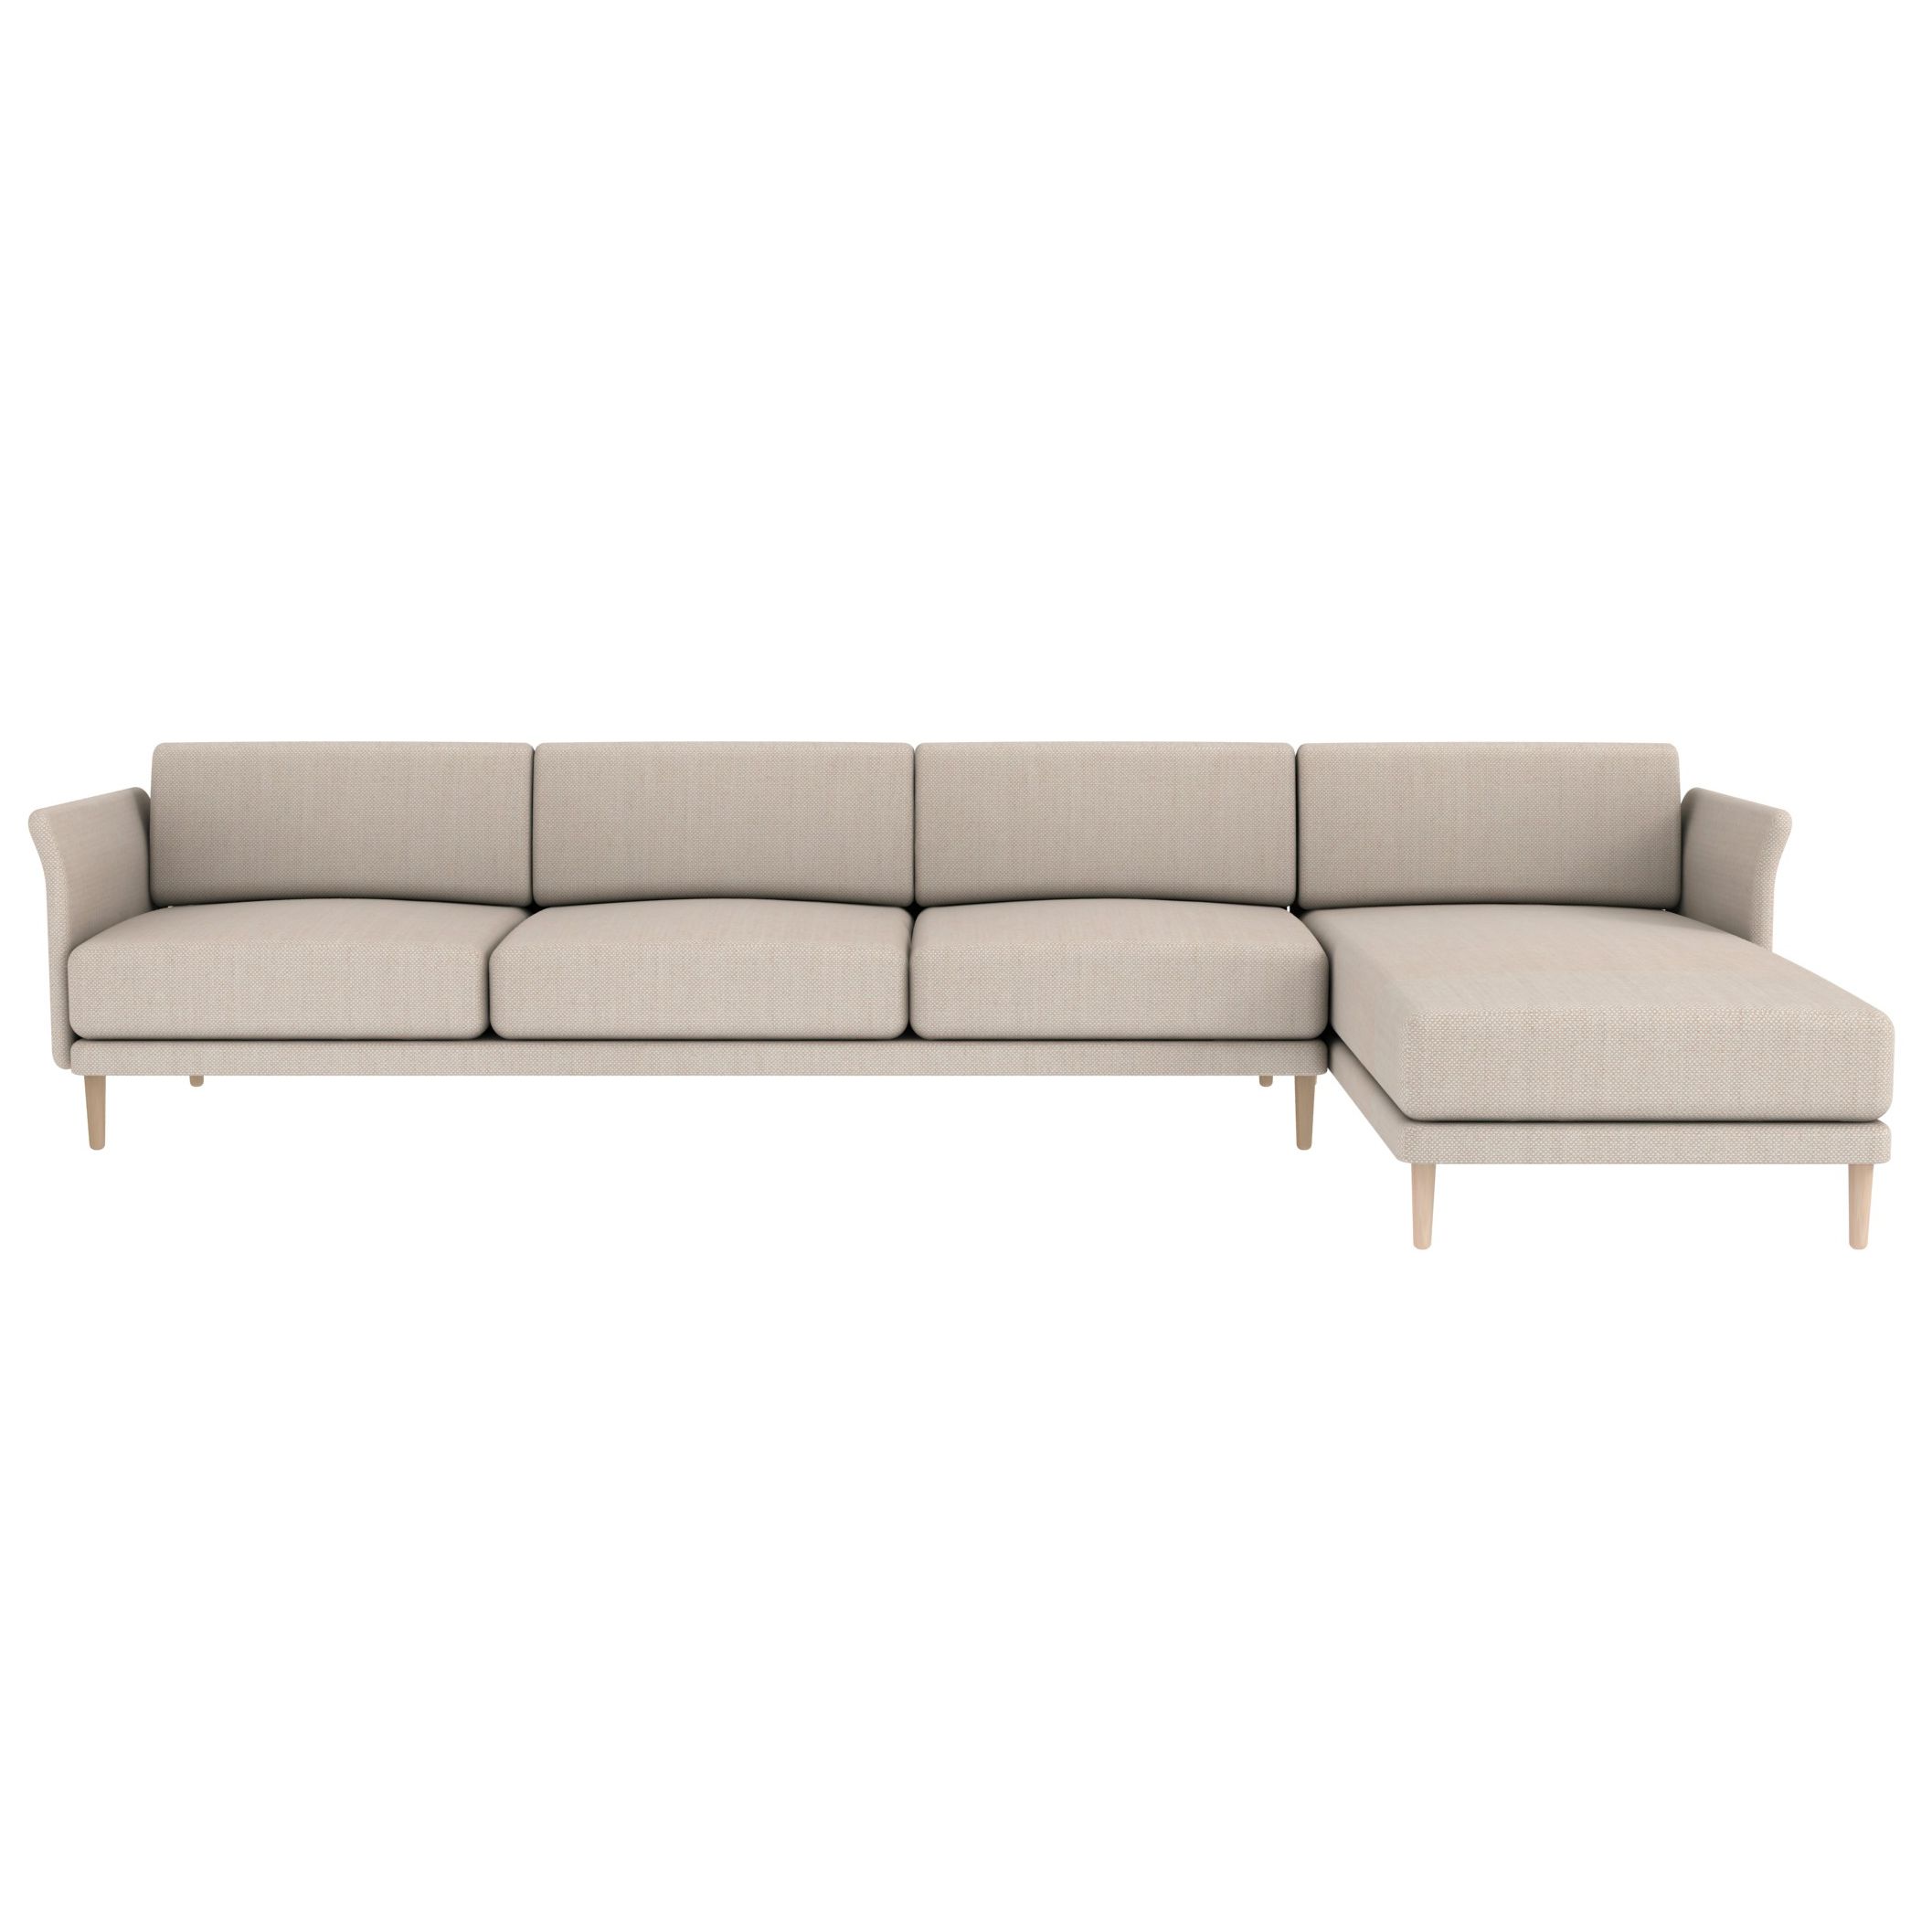 Matthew Hilton for Case Theo 3 Seat Sofa and Chaise, Pepper at John Lewis